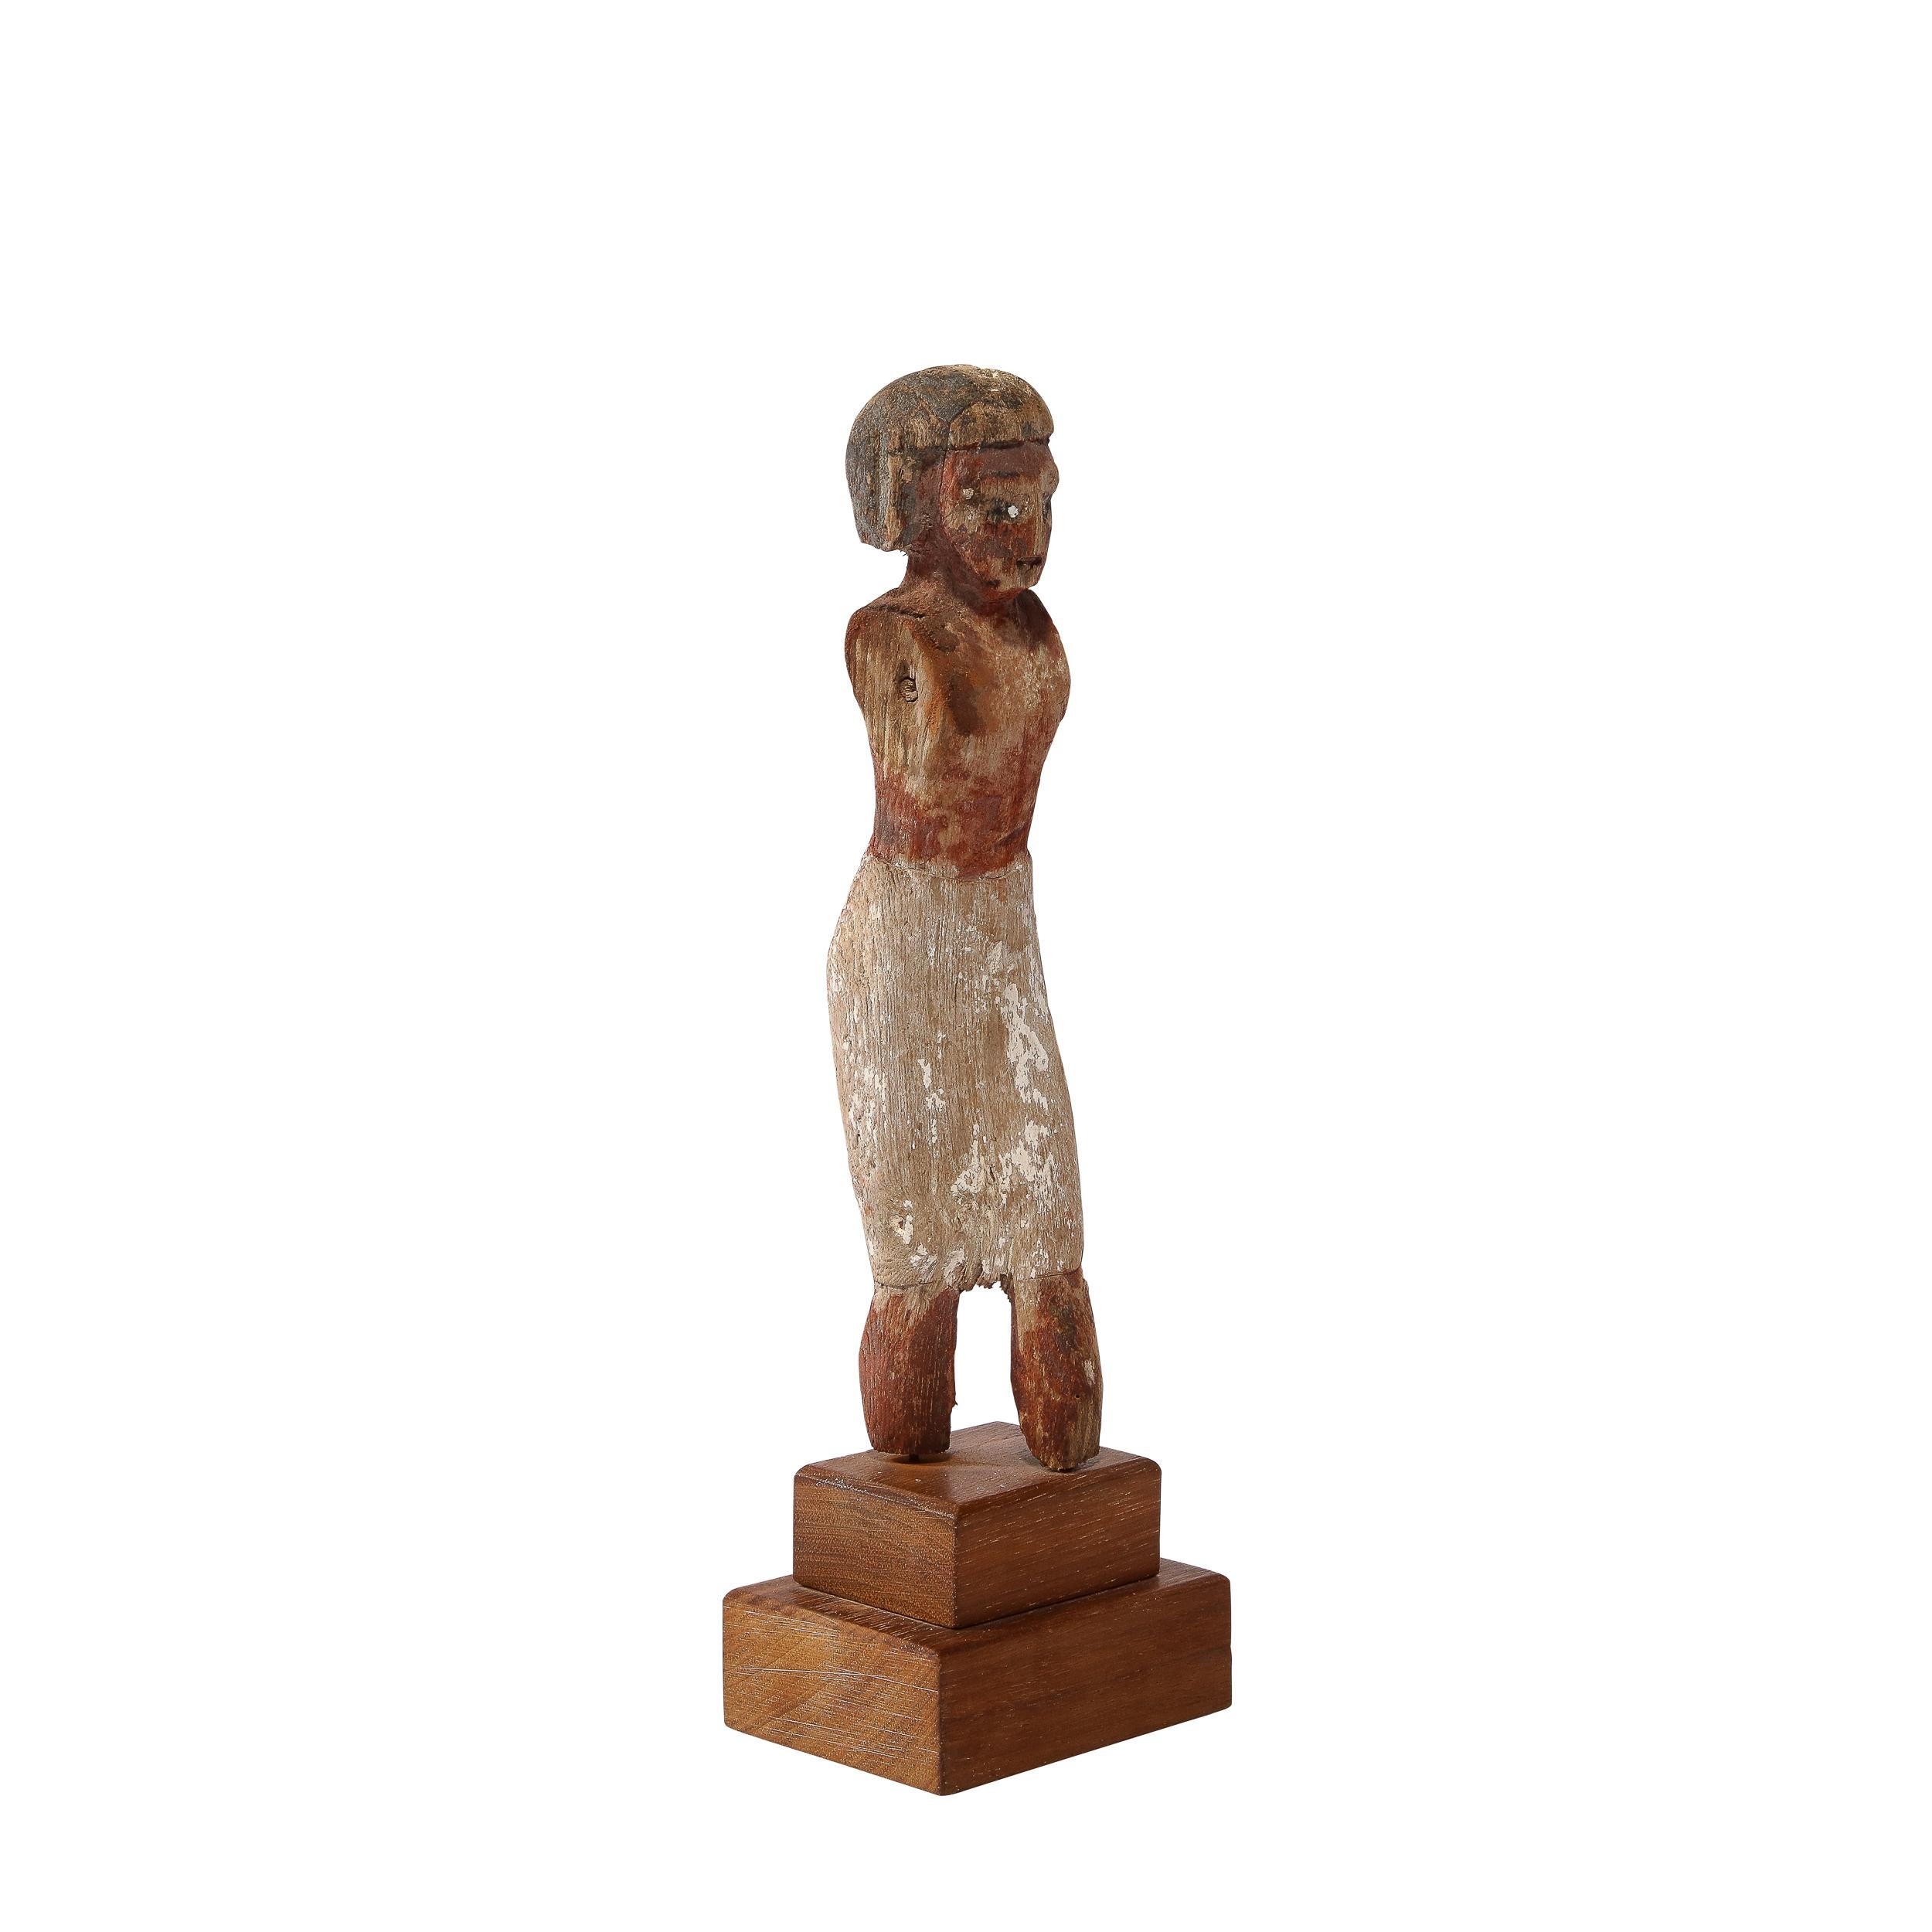 Oarsman carved of wood, originally primed with stucco and painted. This figure formed part of the crew who, some seated, some standing, manned the so-called 